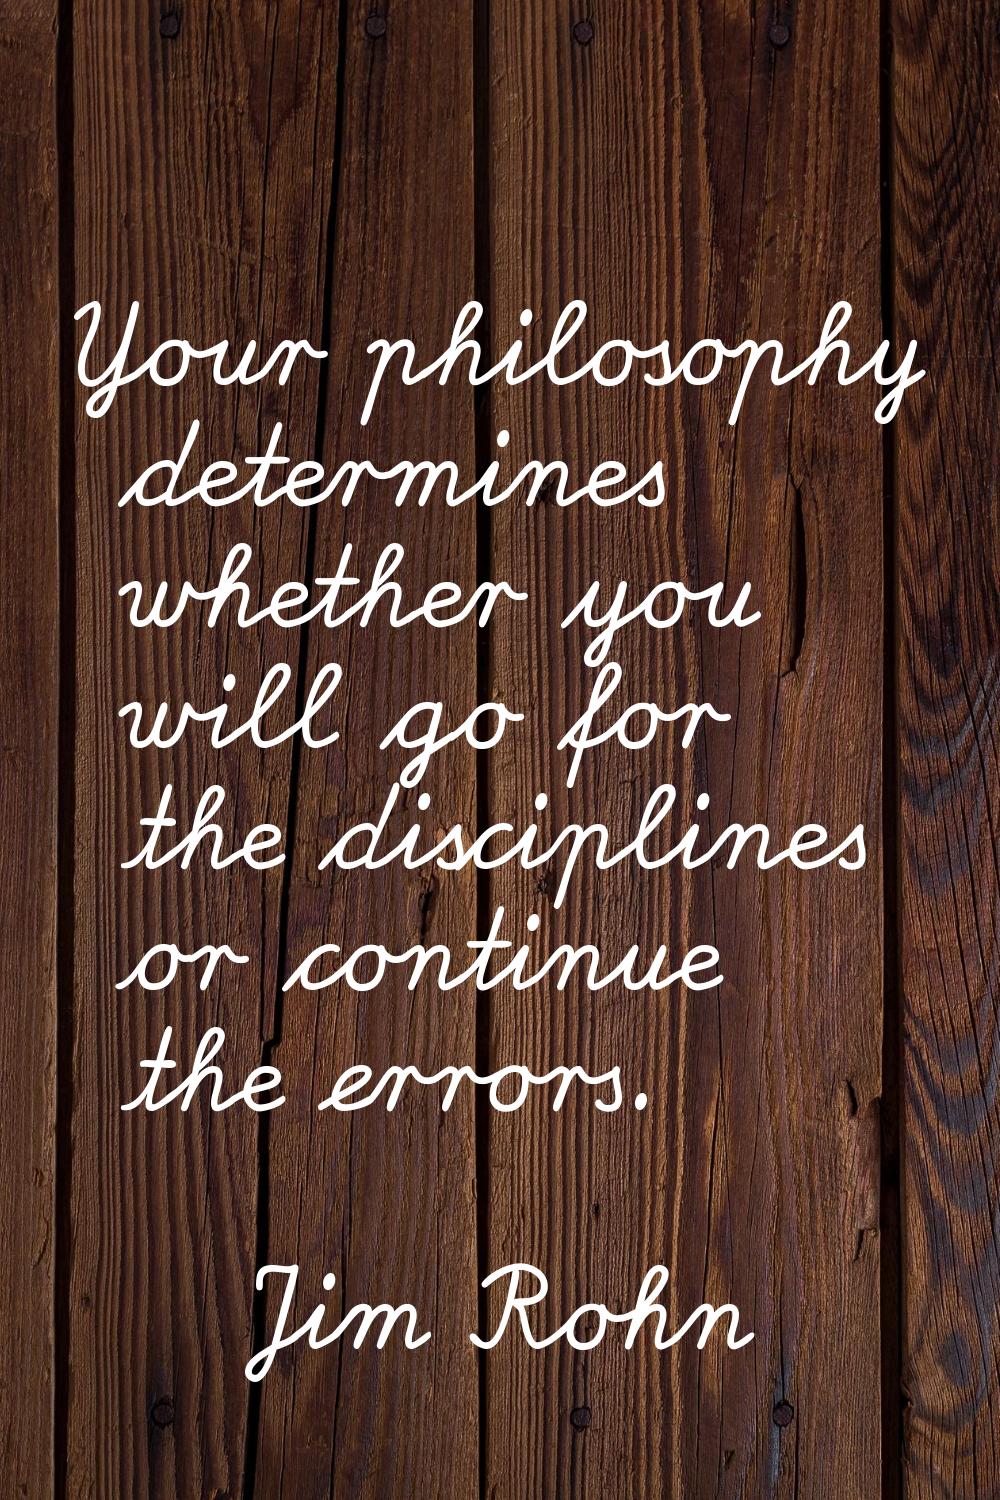 Your philosophy determines whether you will go for the disciplines or continue the errors.